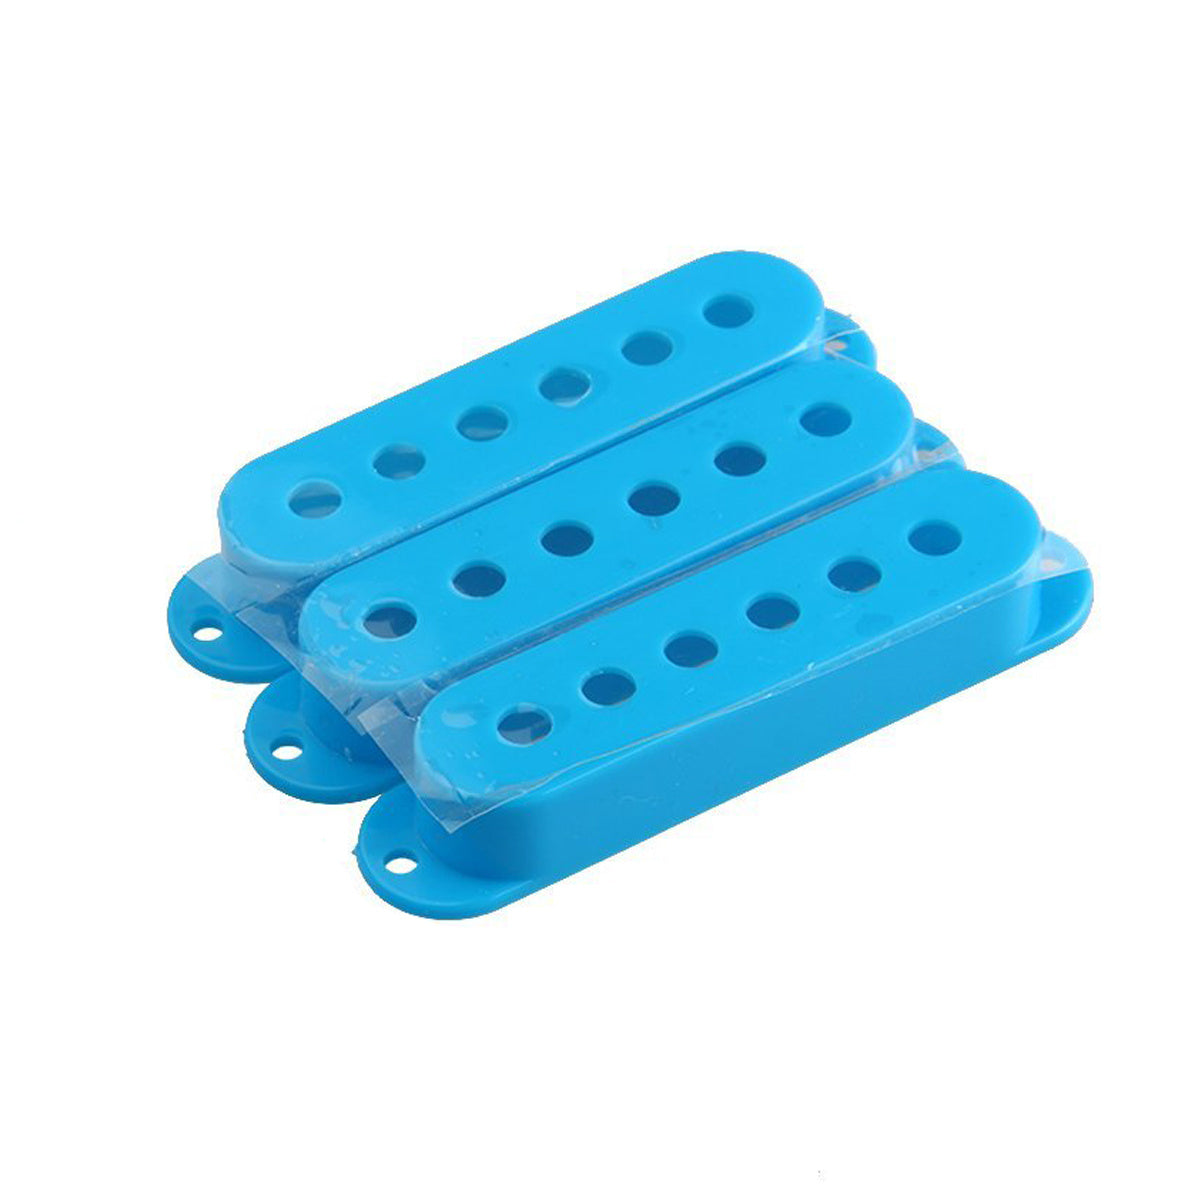 Musiclily 52mm Plastic Strat Style Guitar Single Coil Pickup Cover Set, Blue (3 Pieces)